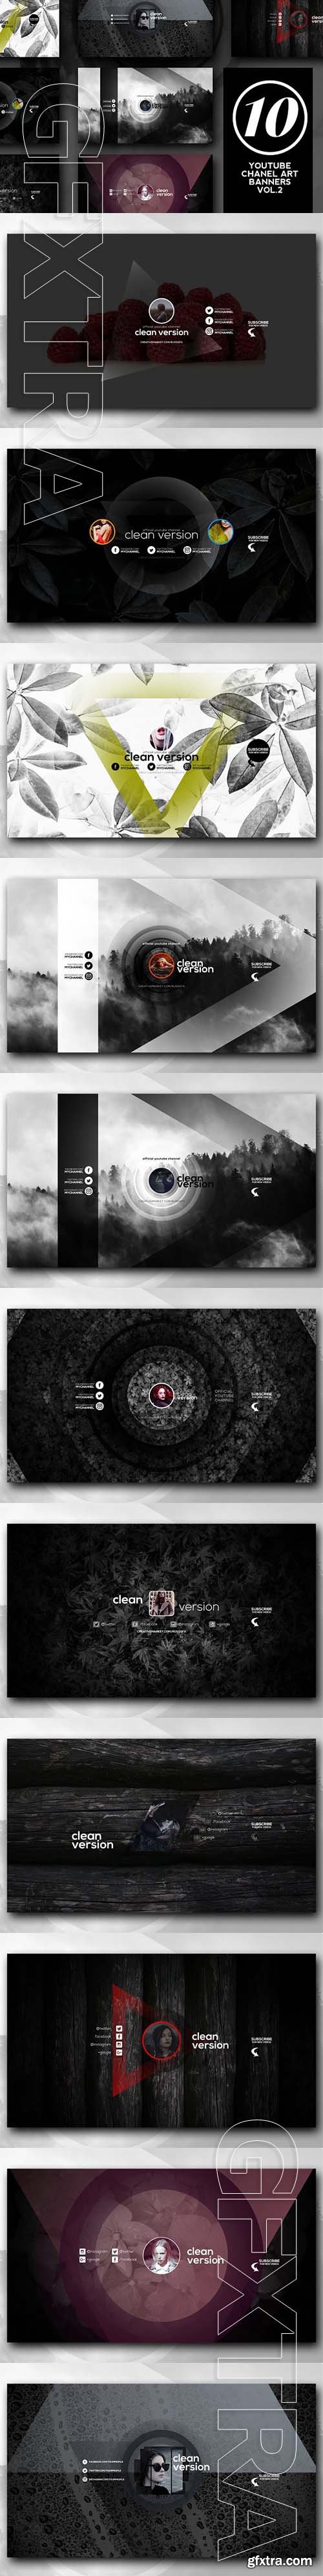 CreativeMarket - 10 Youtube Channel Art Banners vol.2 1476125